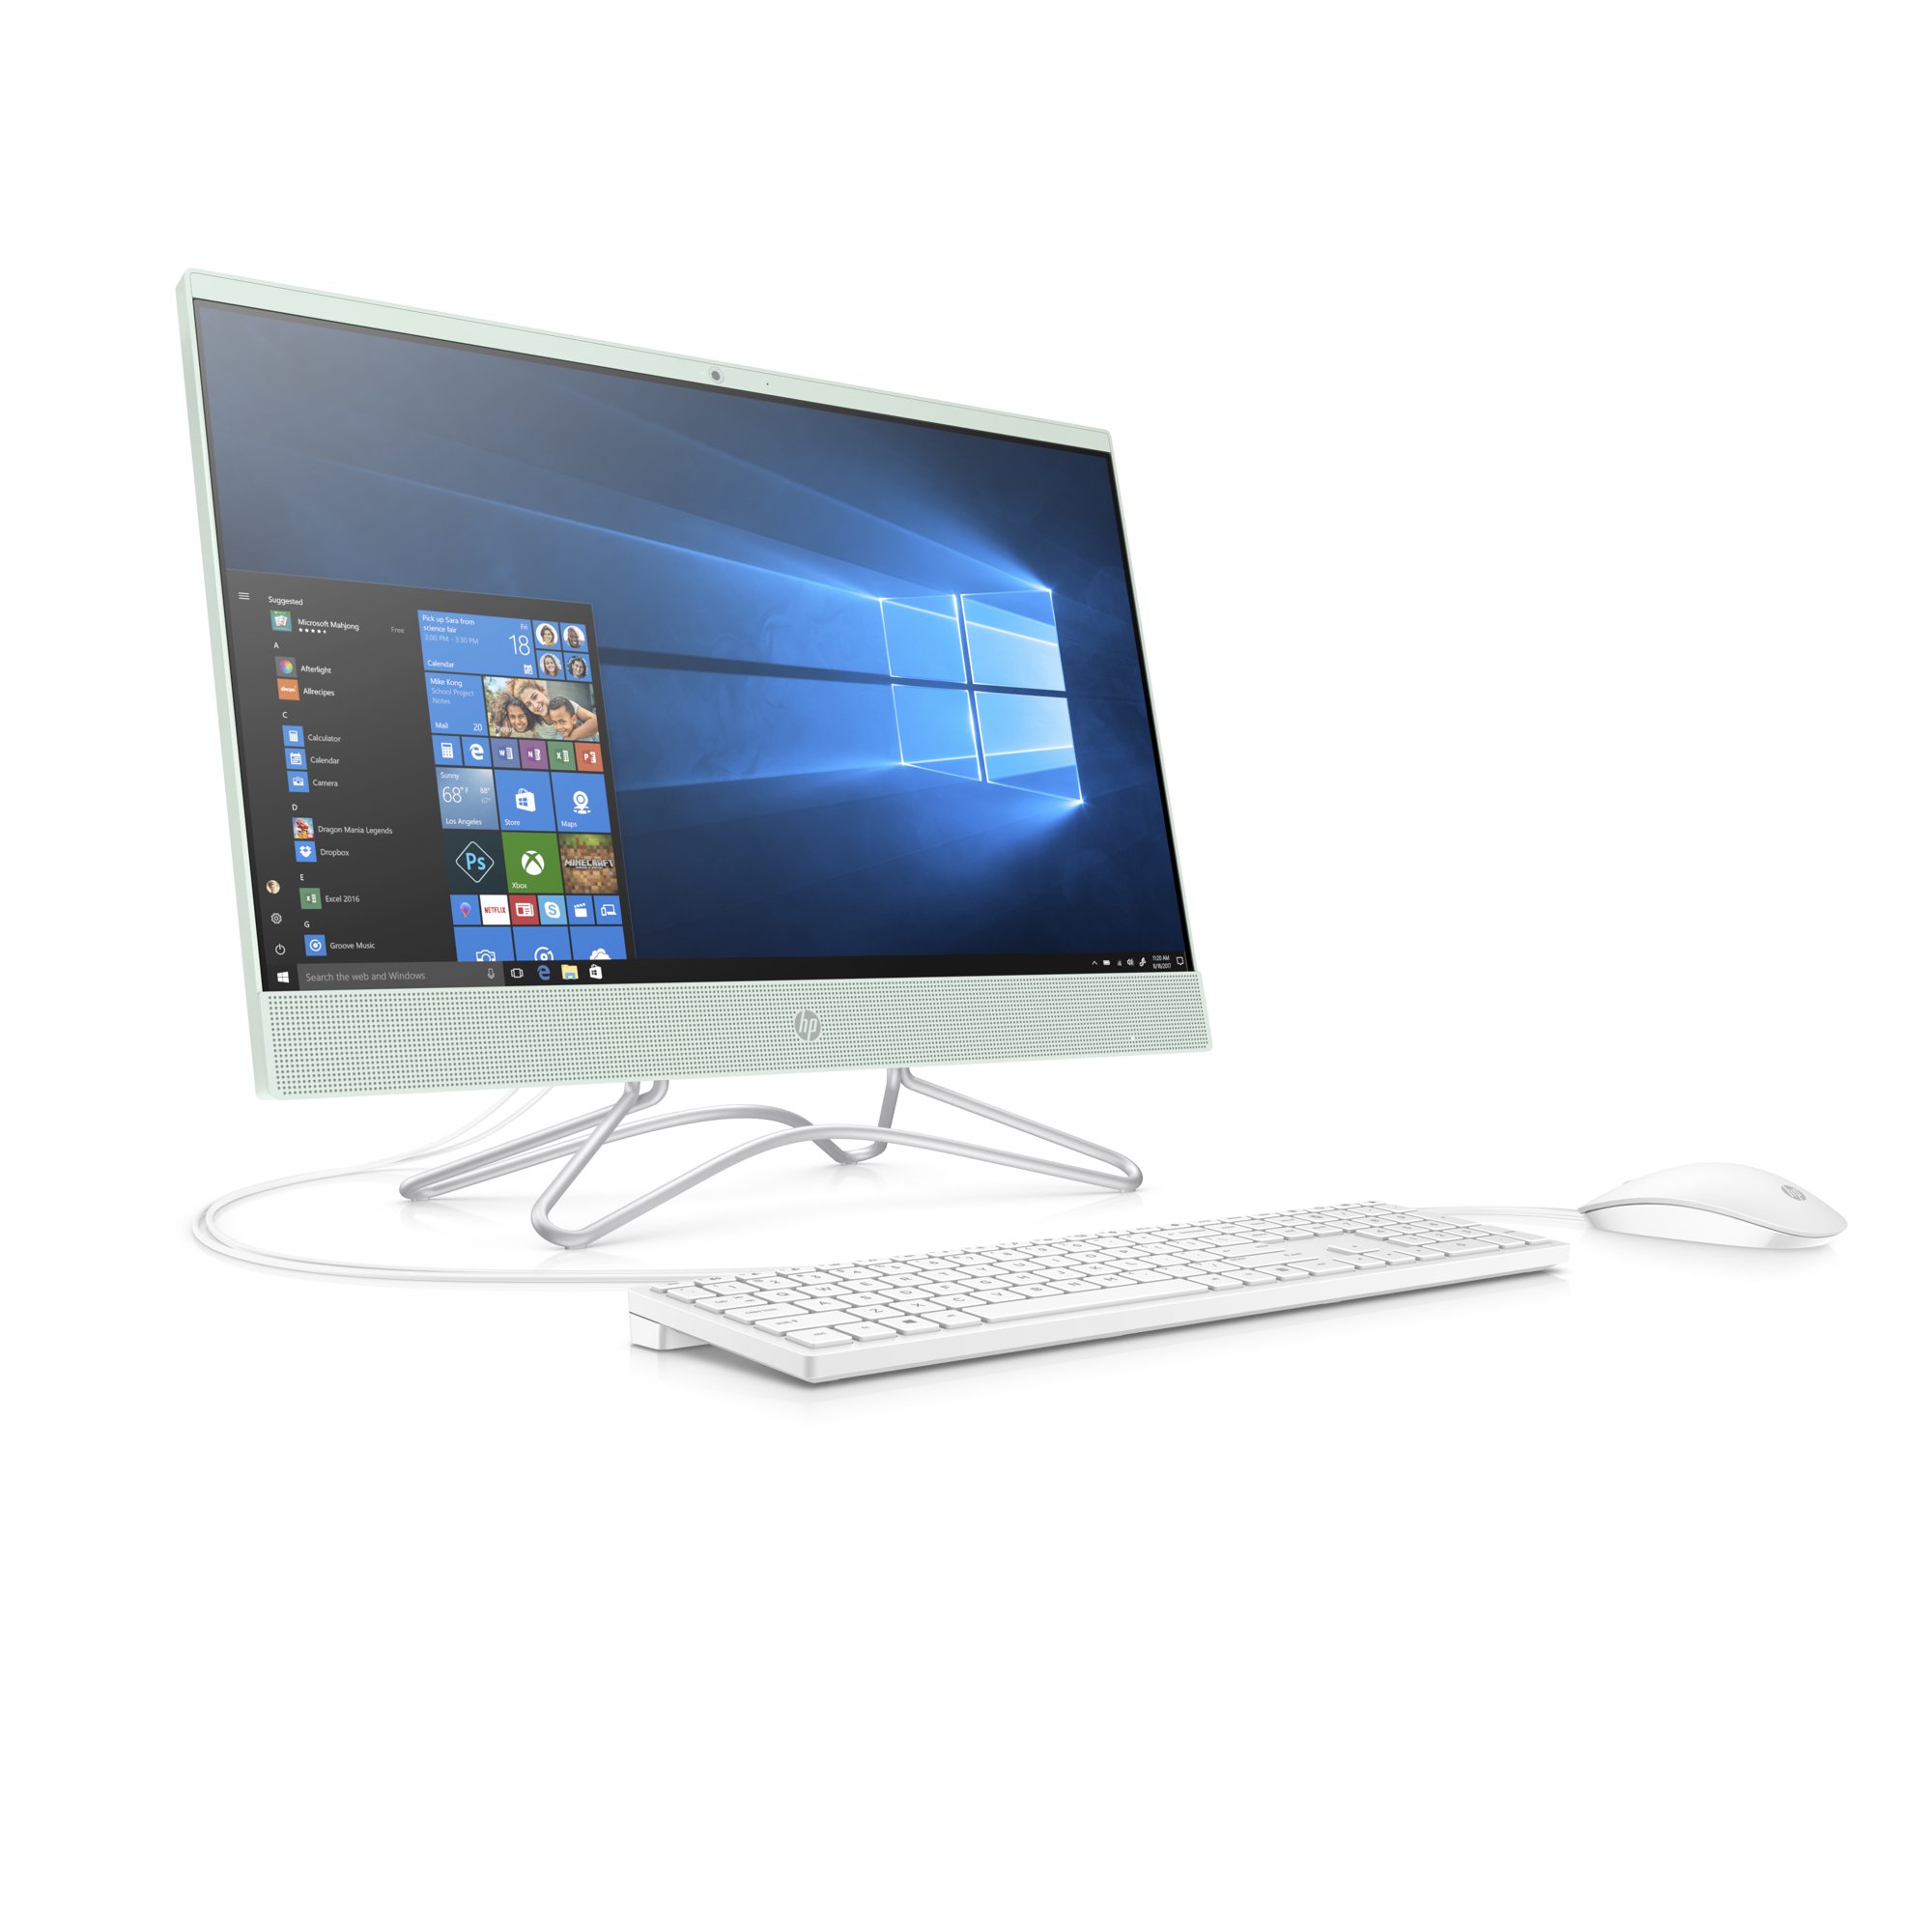 HP 22-c0073w All-in-One, 22" Display, Intel Celeron G4900T 2.9 GHz, 4GB RAM, 1TB HDD, Mint Color - image 2 of 5